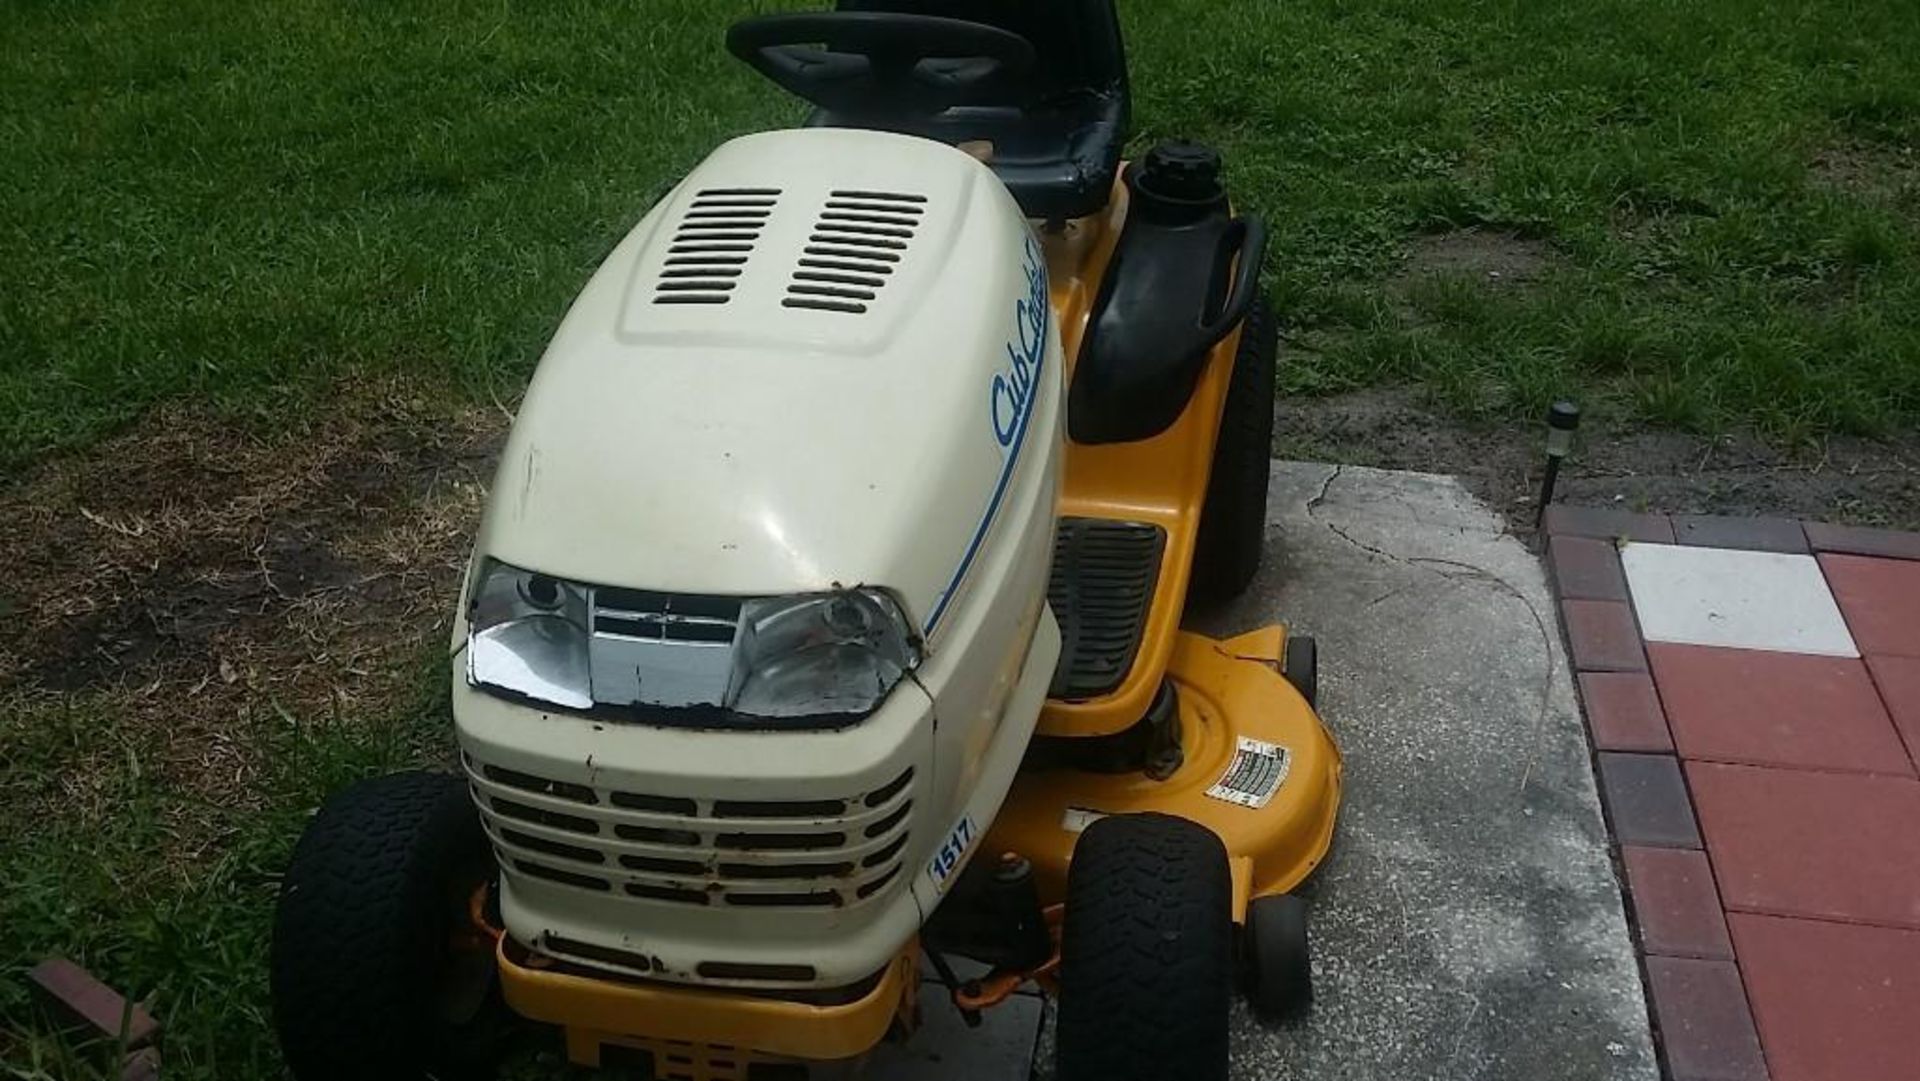 CUB CADET 1517 MOWER, 279.9 HOURS SHOWING, RUNS - Image 16 of 18